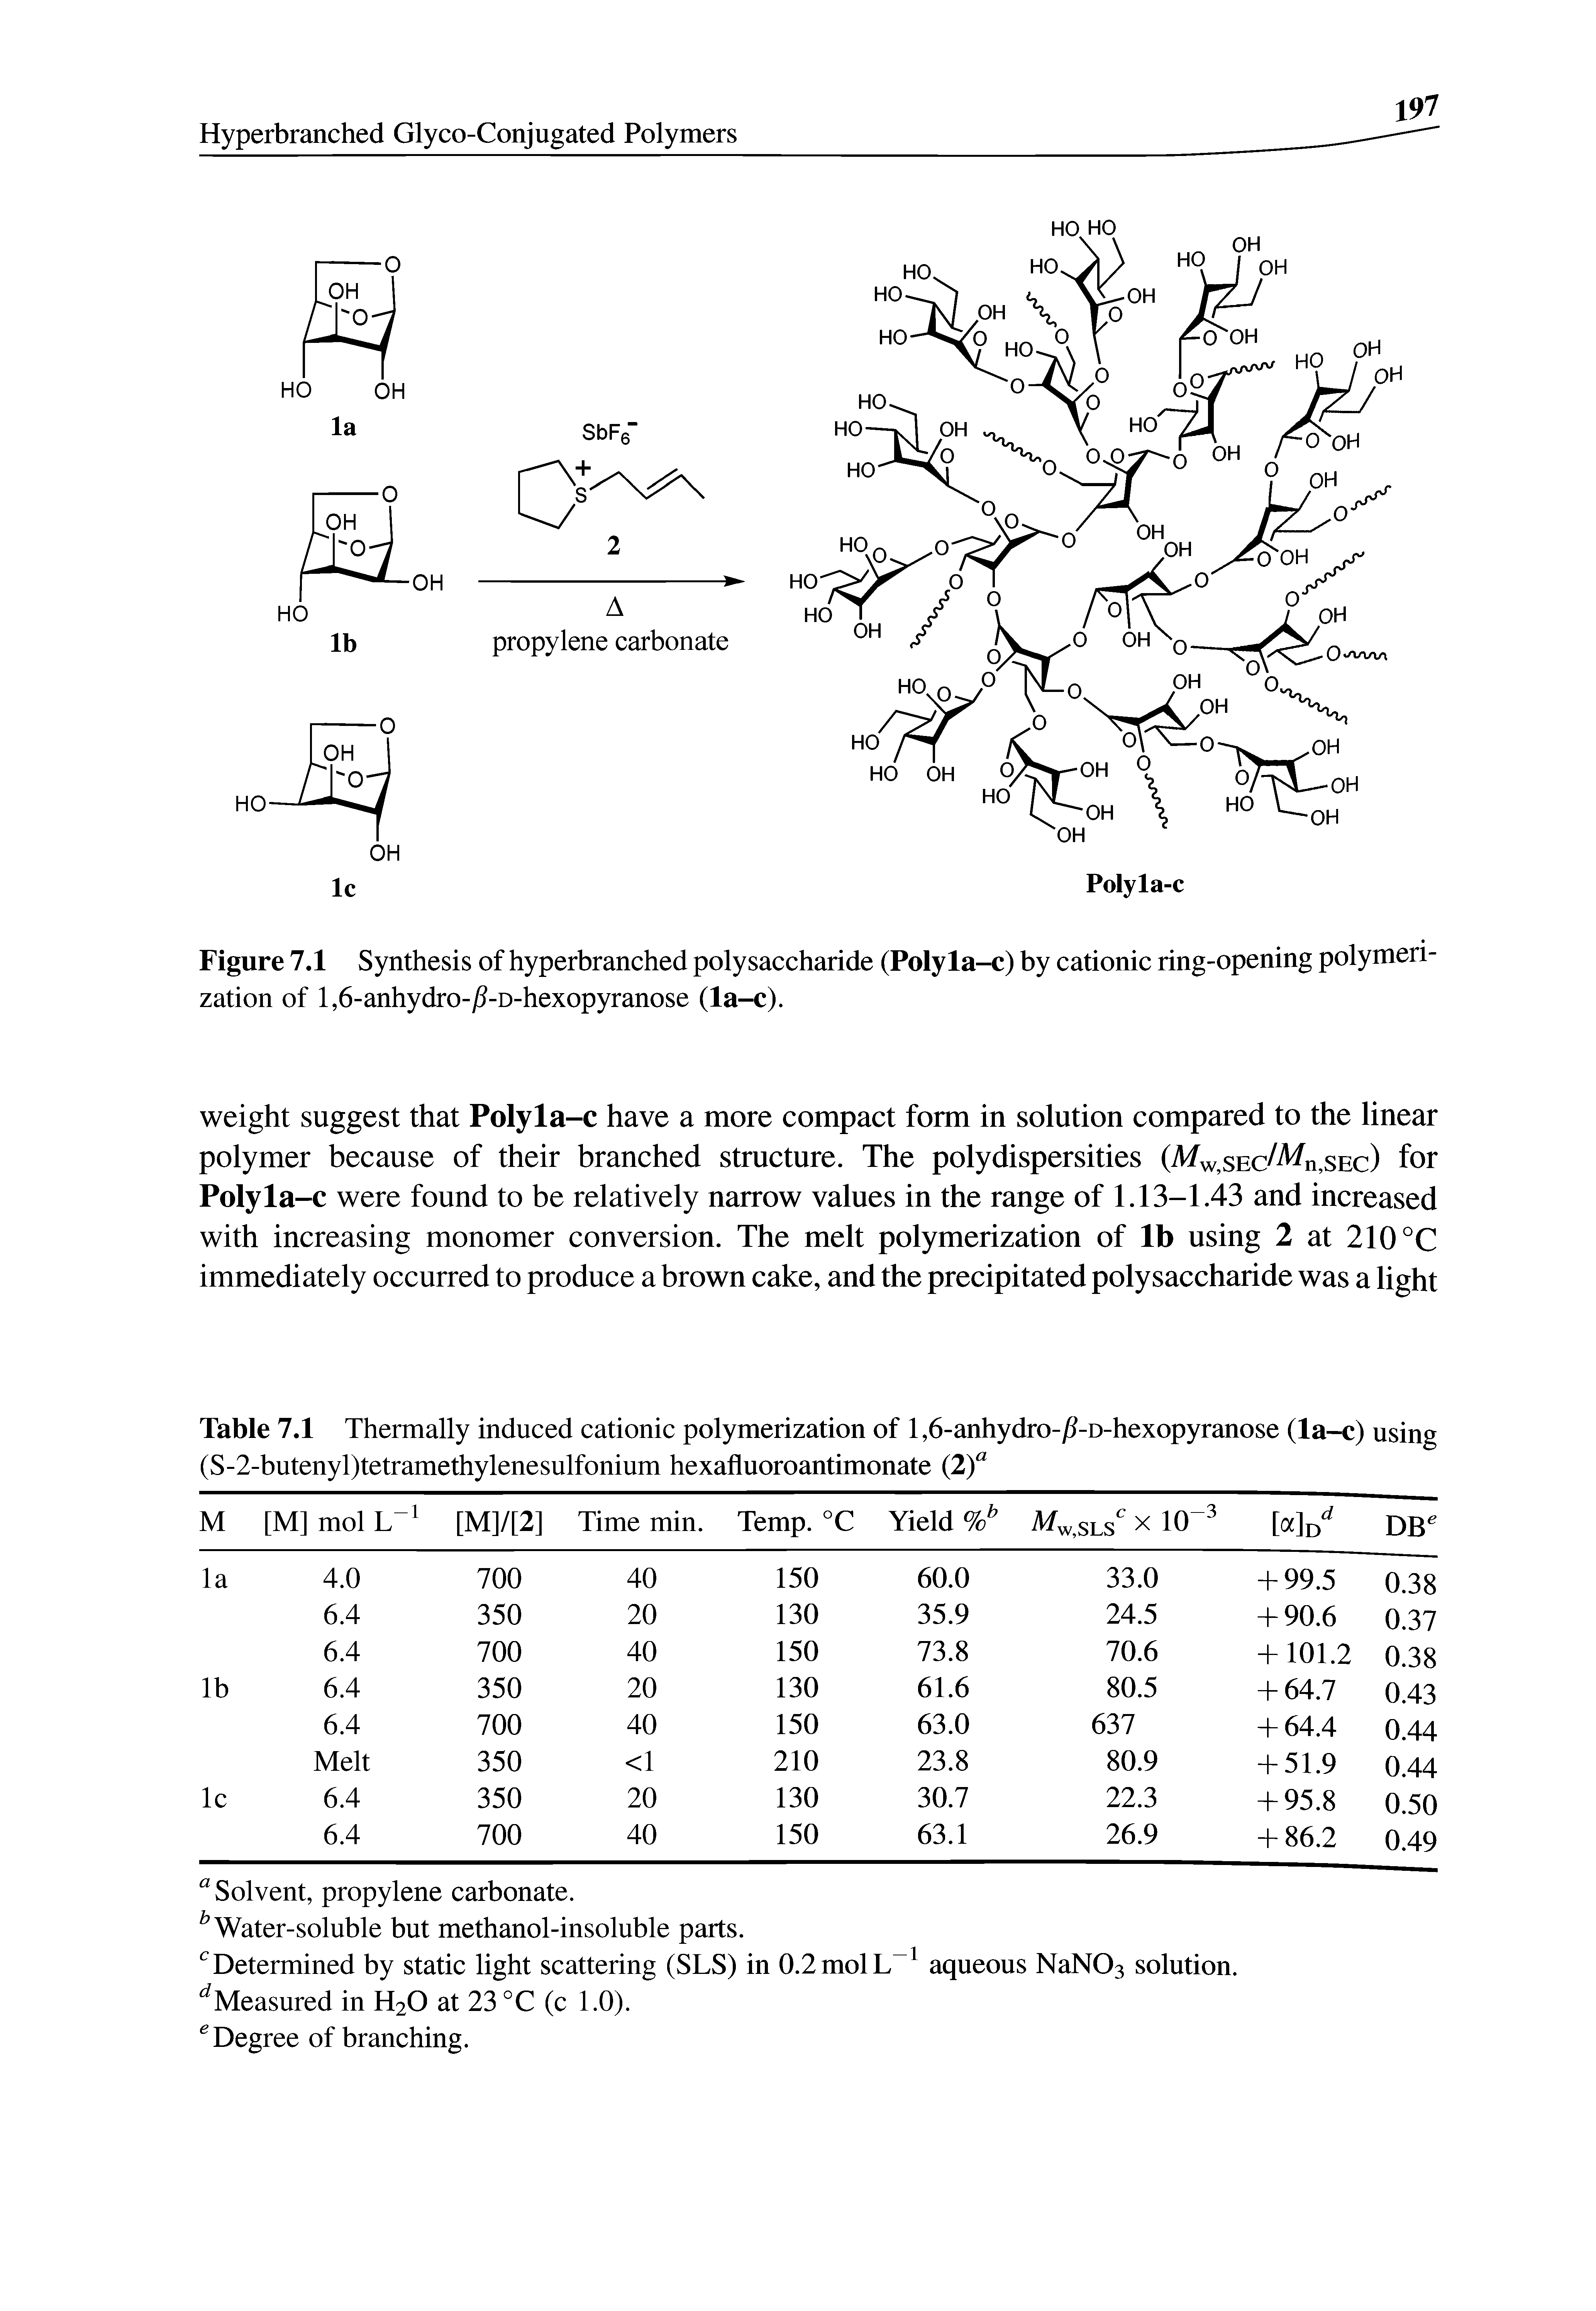 Figure 7.1 Synthesis of hyperbranched polysaccharide (Polyla-c) by cationic ring-opening polymerization of l,6-anhydro-j5-D-hexopyranose (la-c).